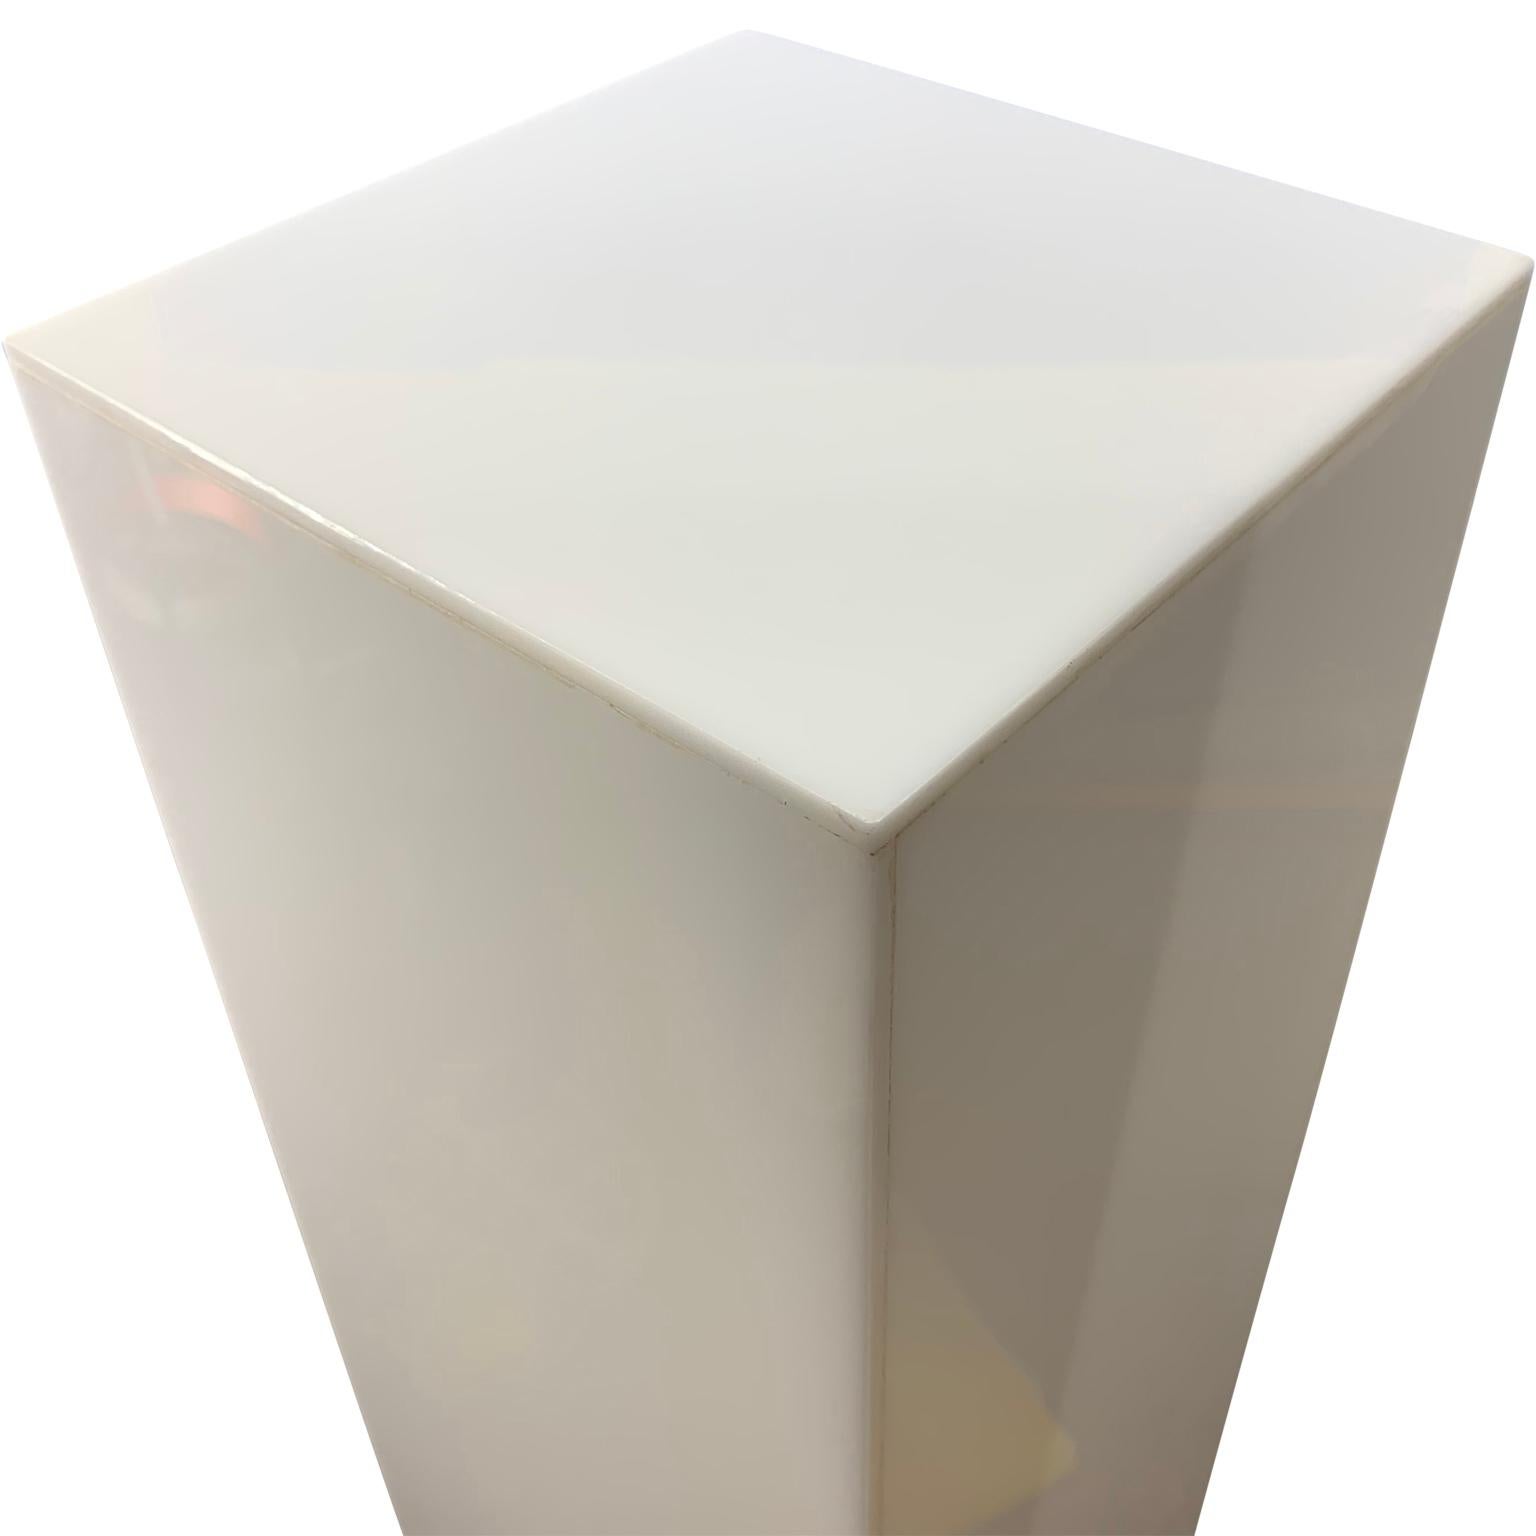 Tall modernist white Lucite or acrylic pedestal stand display column
Pedestal is electrified and lights up using a LED light bulb.